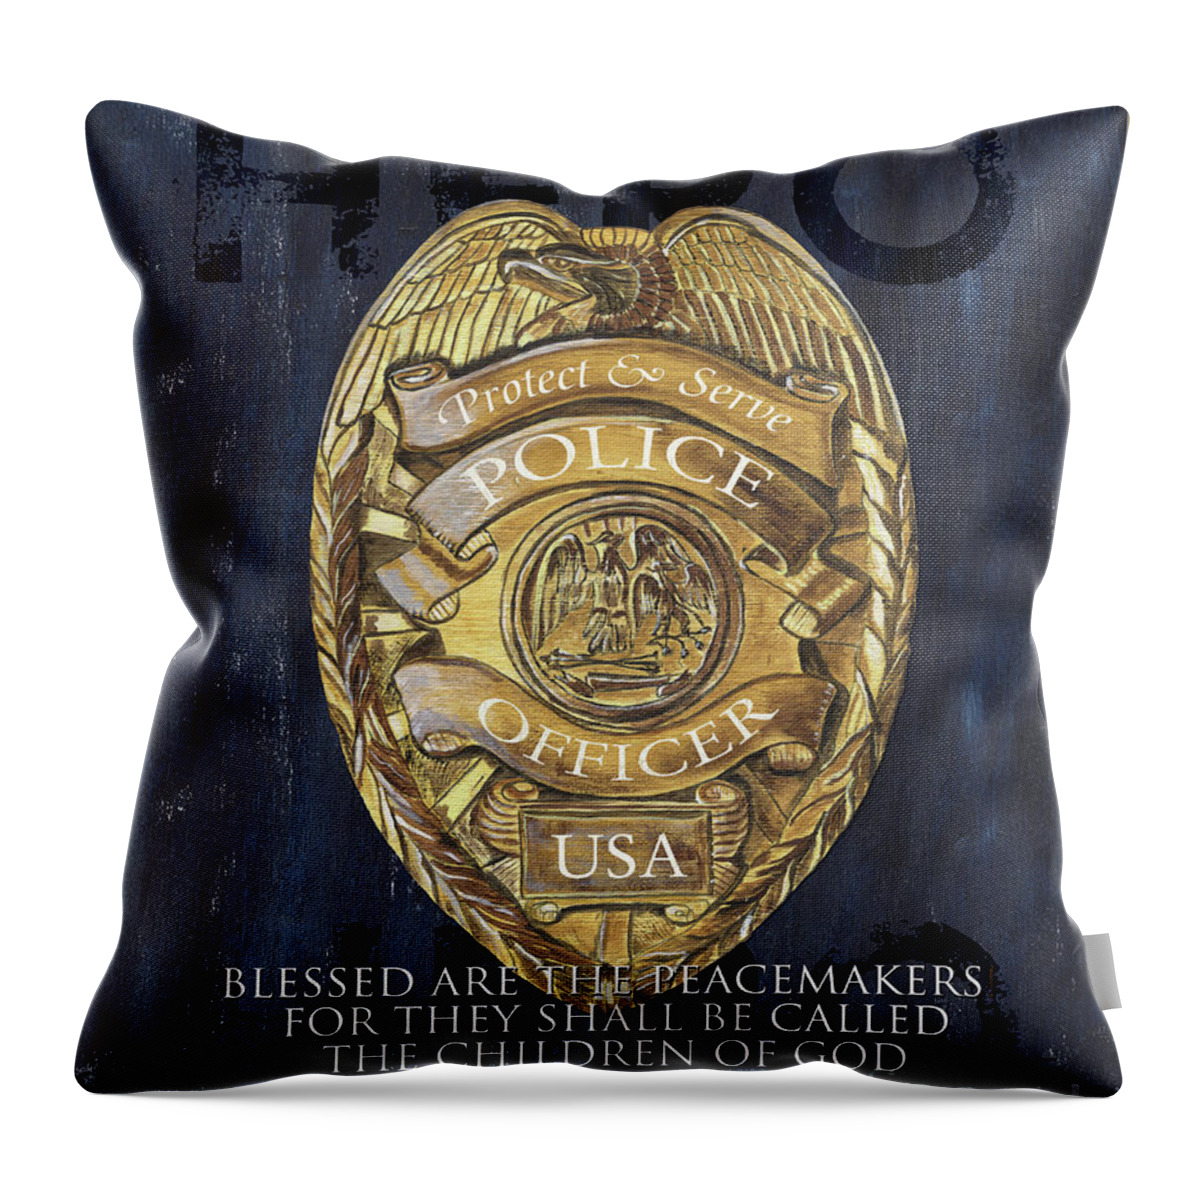 Police Throw Pillow featuring the painting Blessed are the Peacemakers by Debbie DeWitt